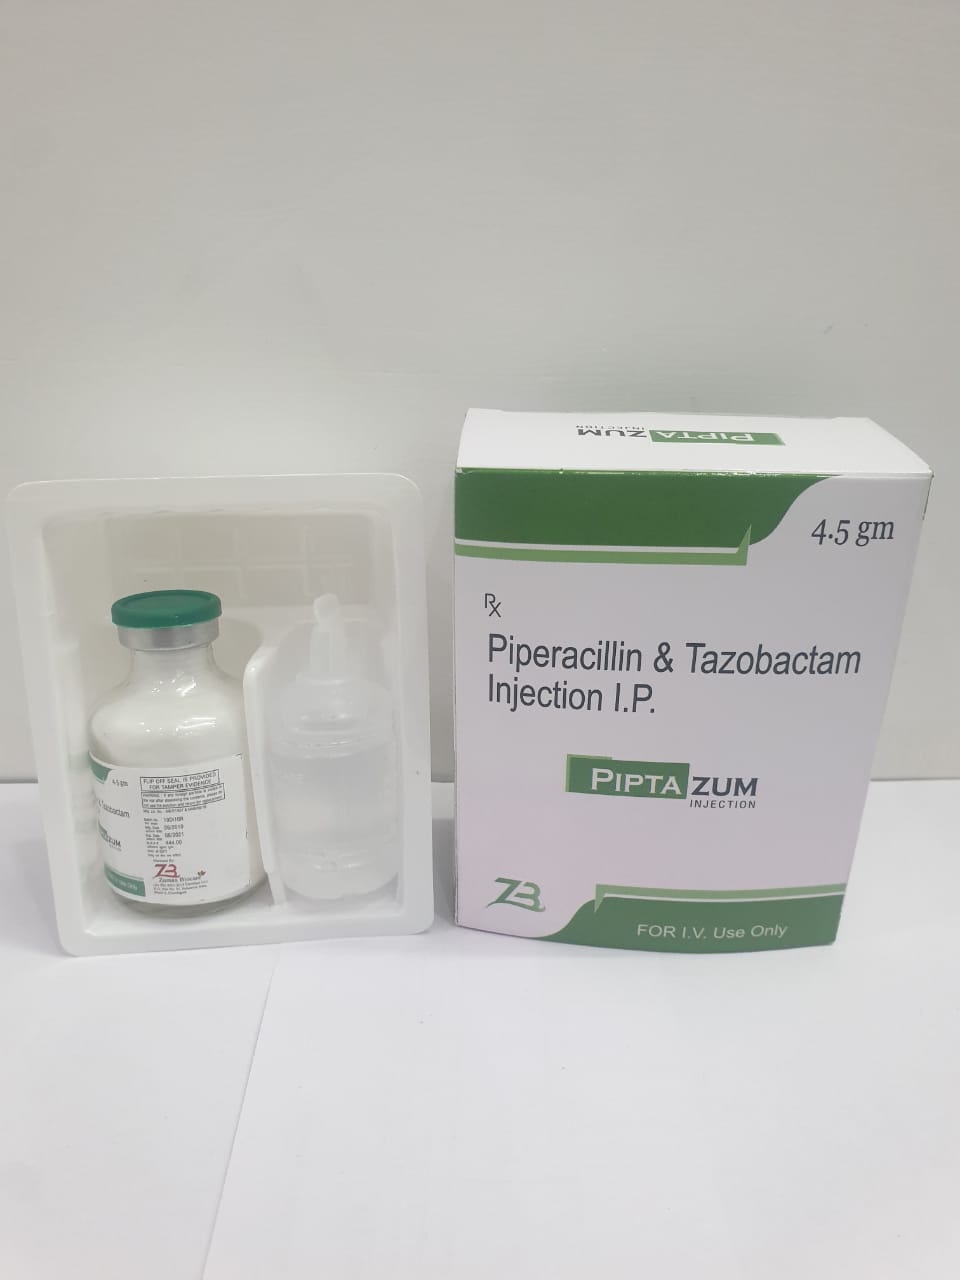 Product Name: Piptazum, Compositions of are Piperacillin  & Tazobactam Injection I.P. - Zumax Biocare